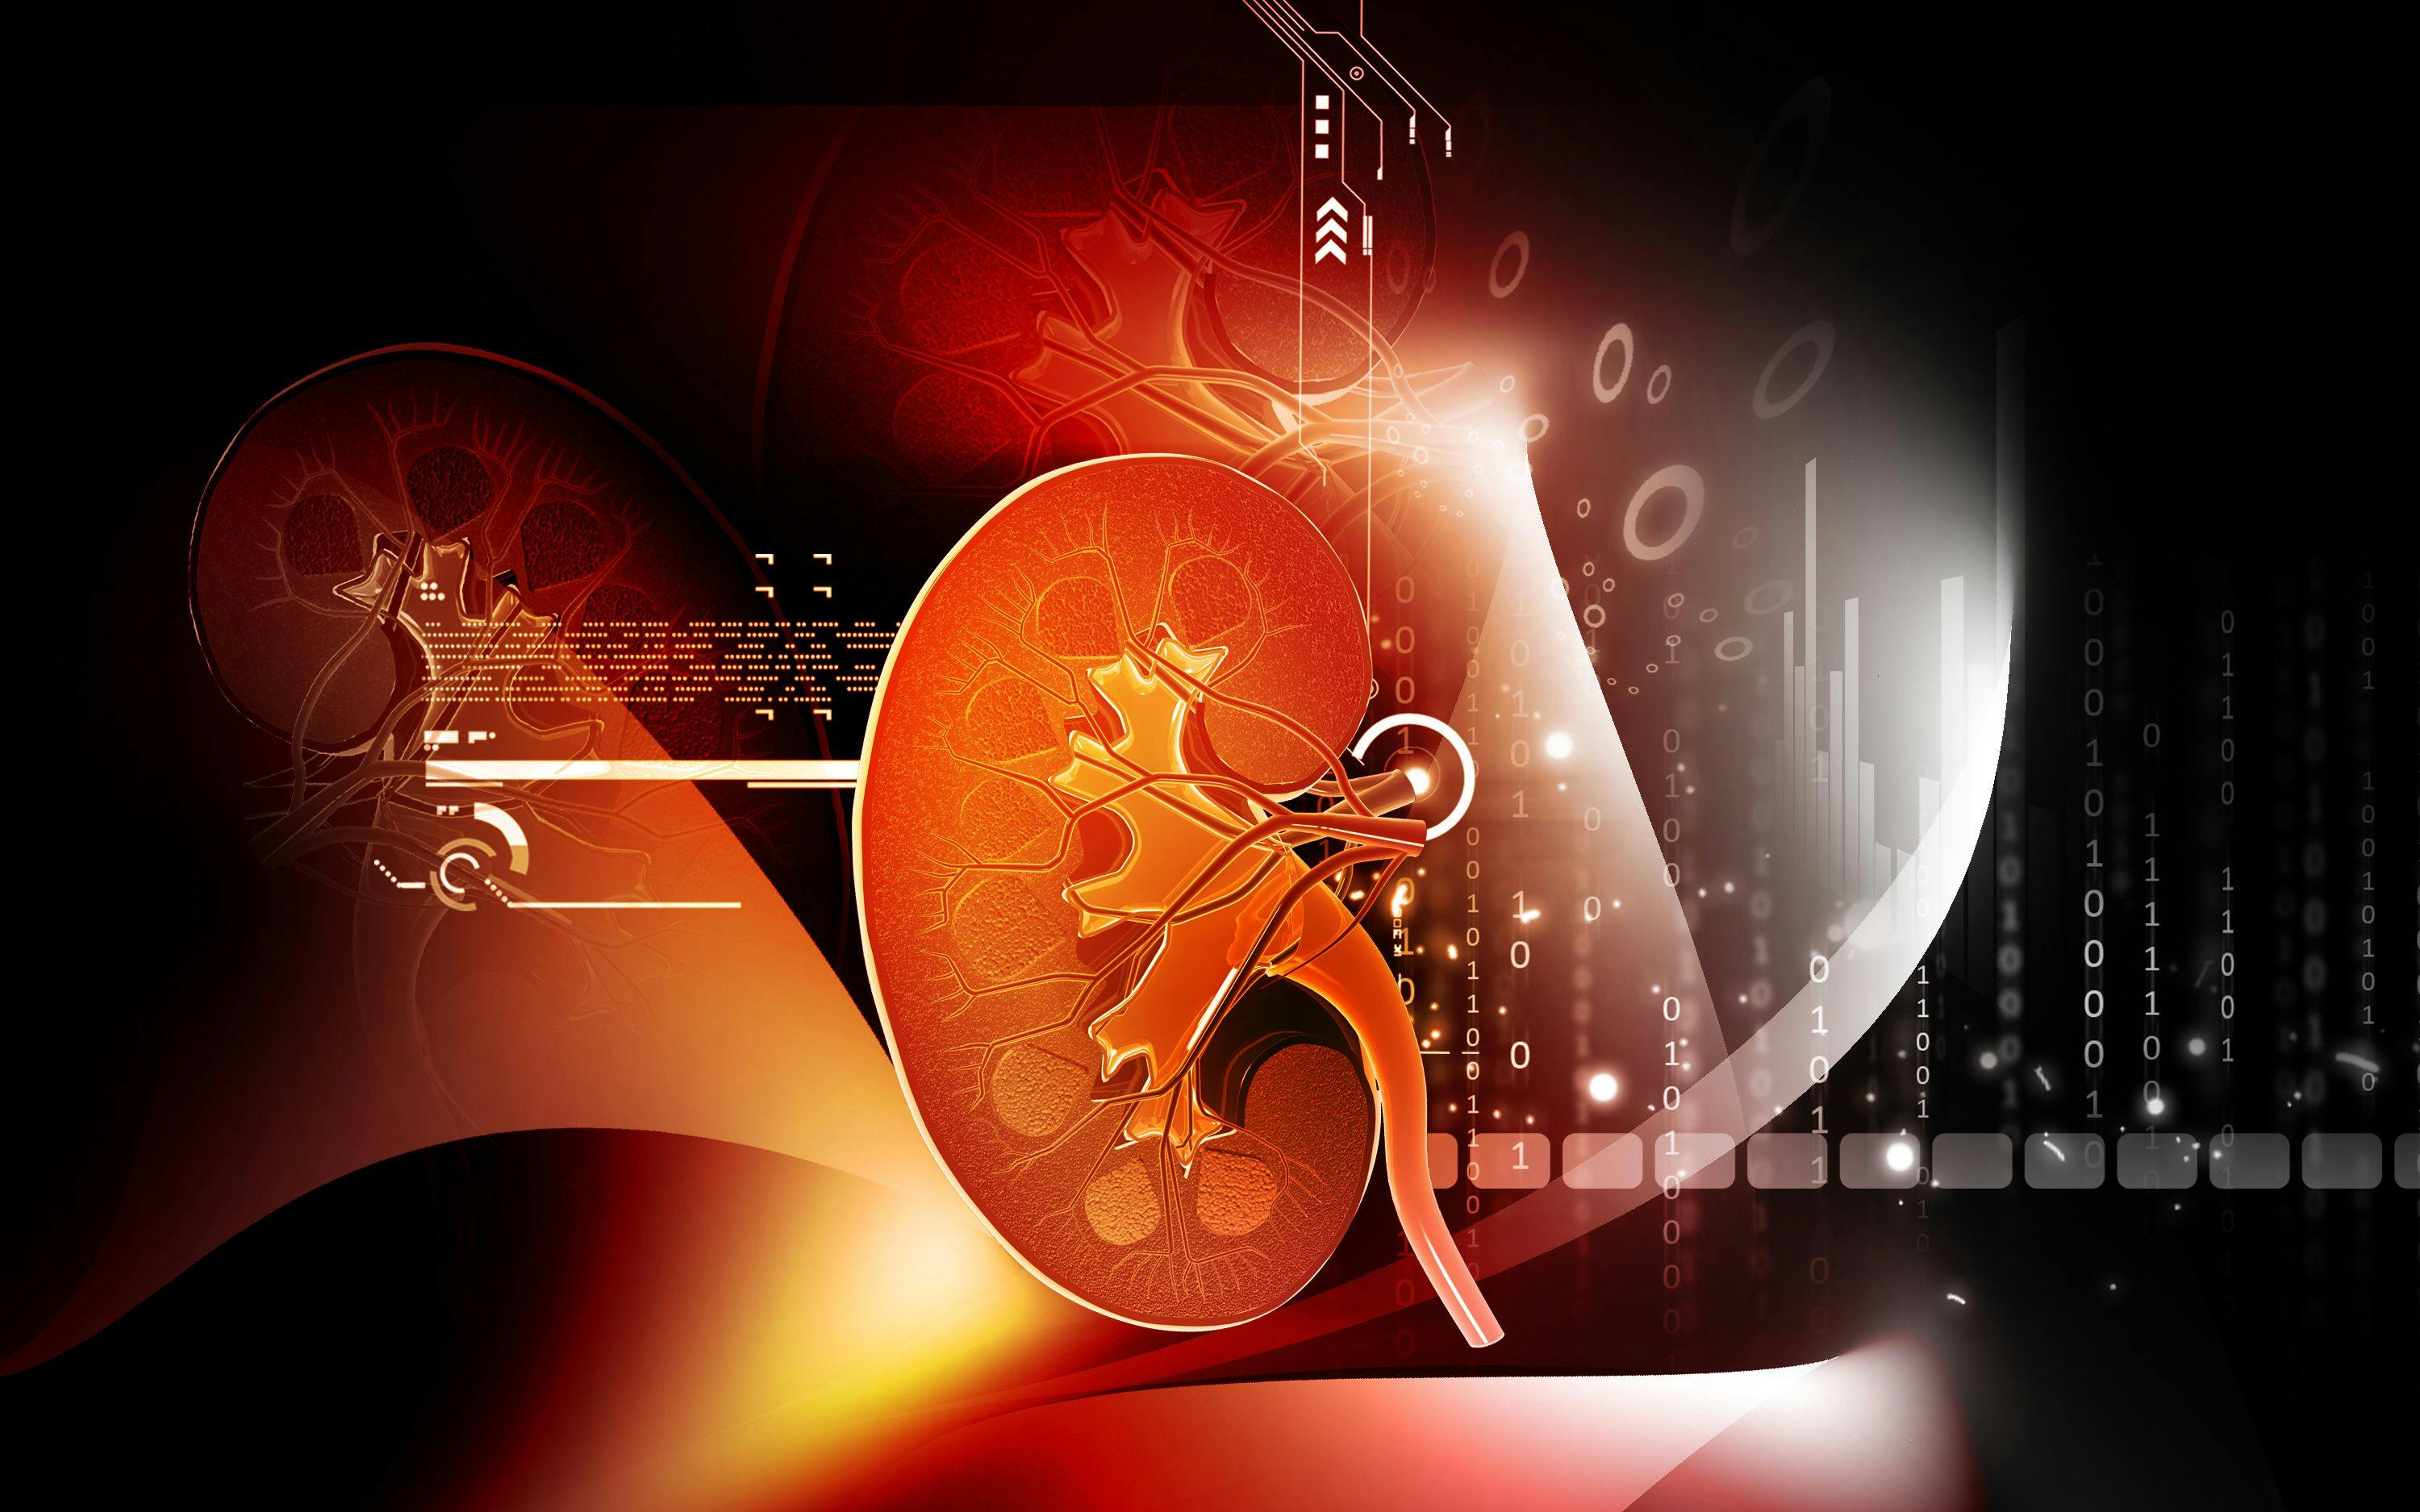 model of a kidney over a complex red background